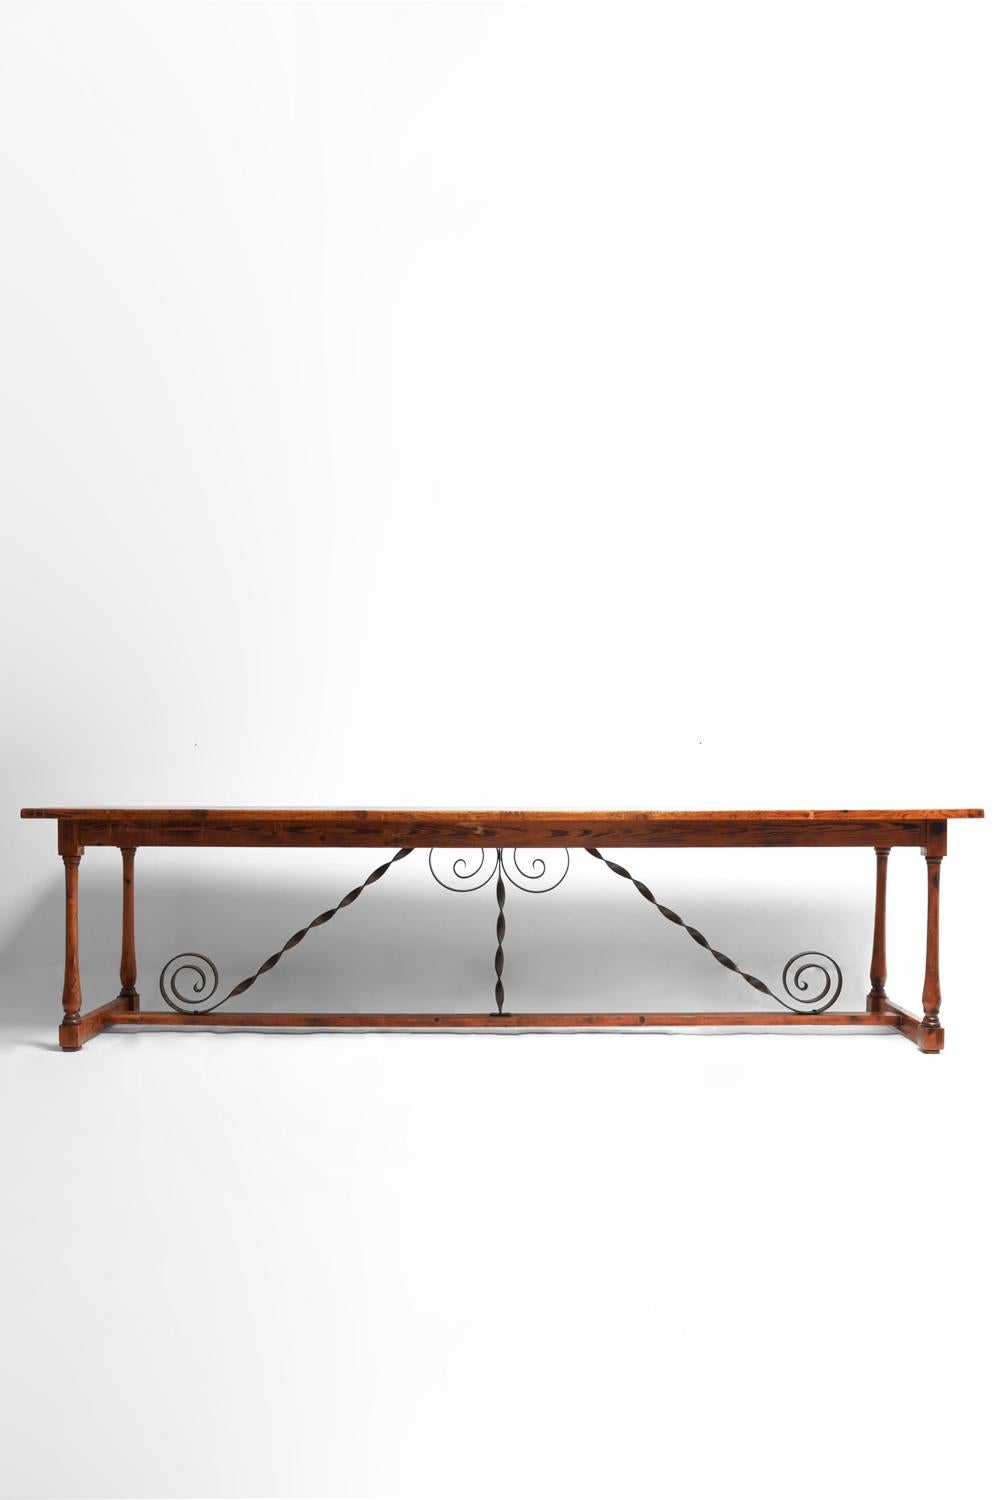 Pine and ironwork dining table, console resting on four columnar legs joined by a spacer topped with ironwork. Spain, 1910s.